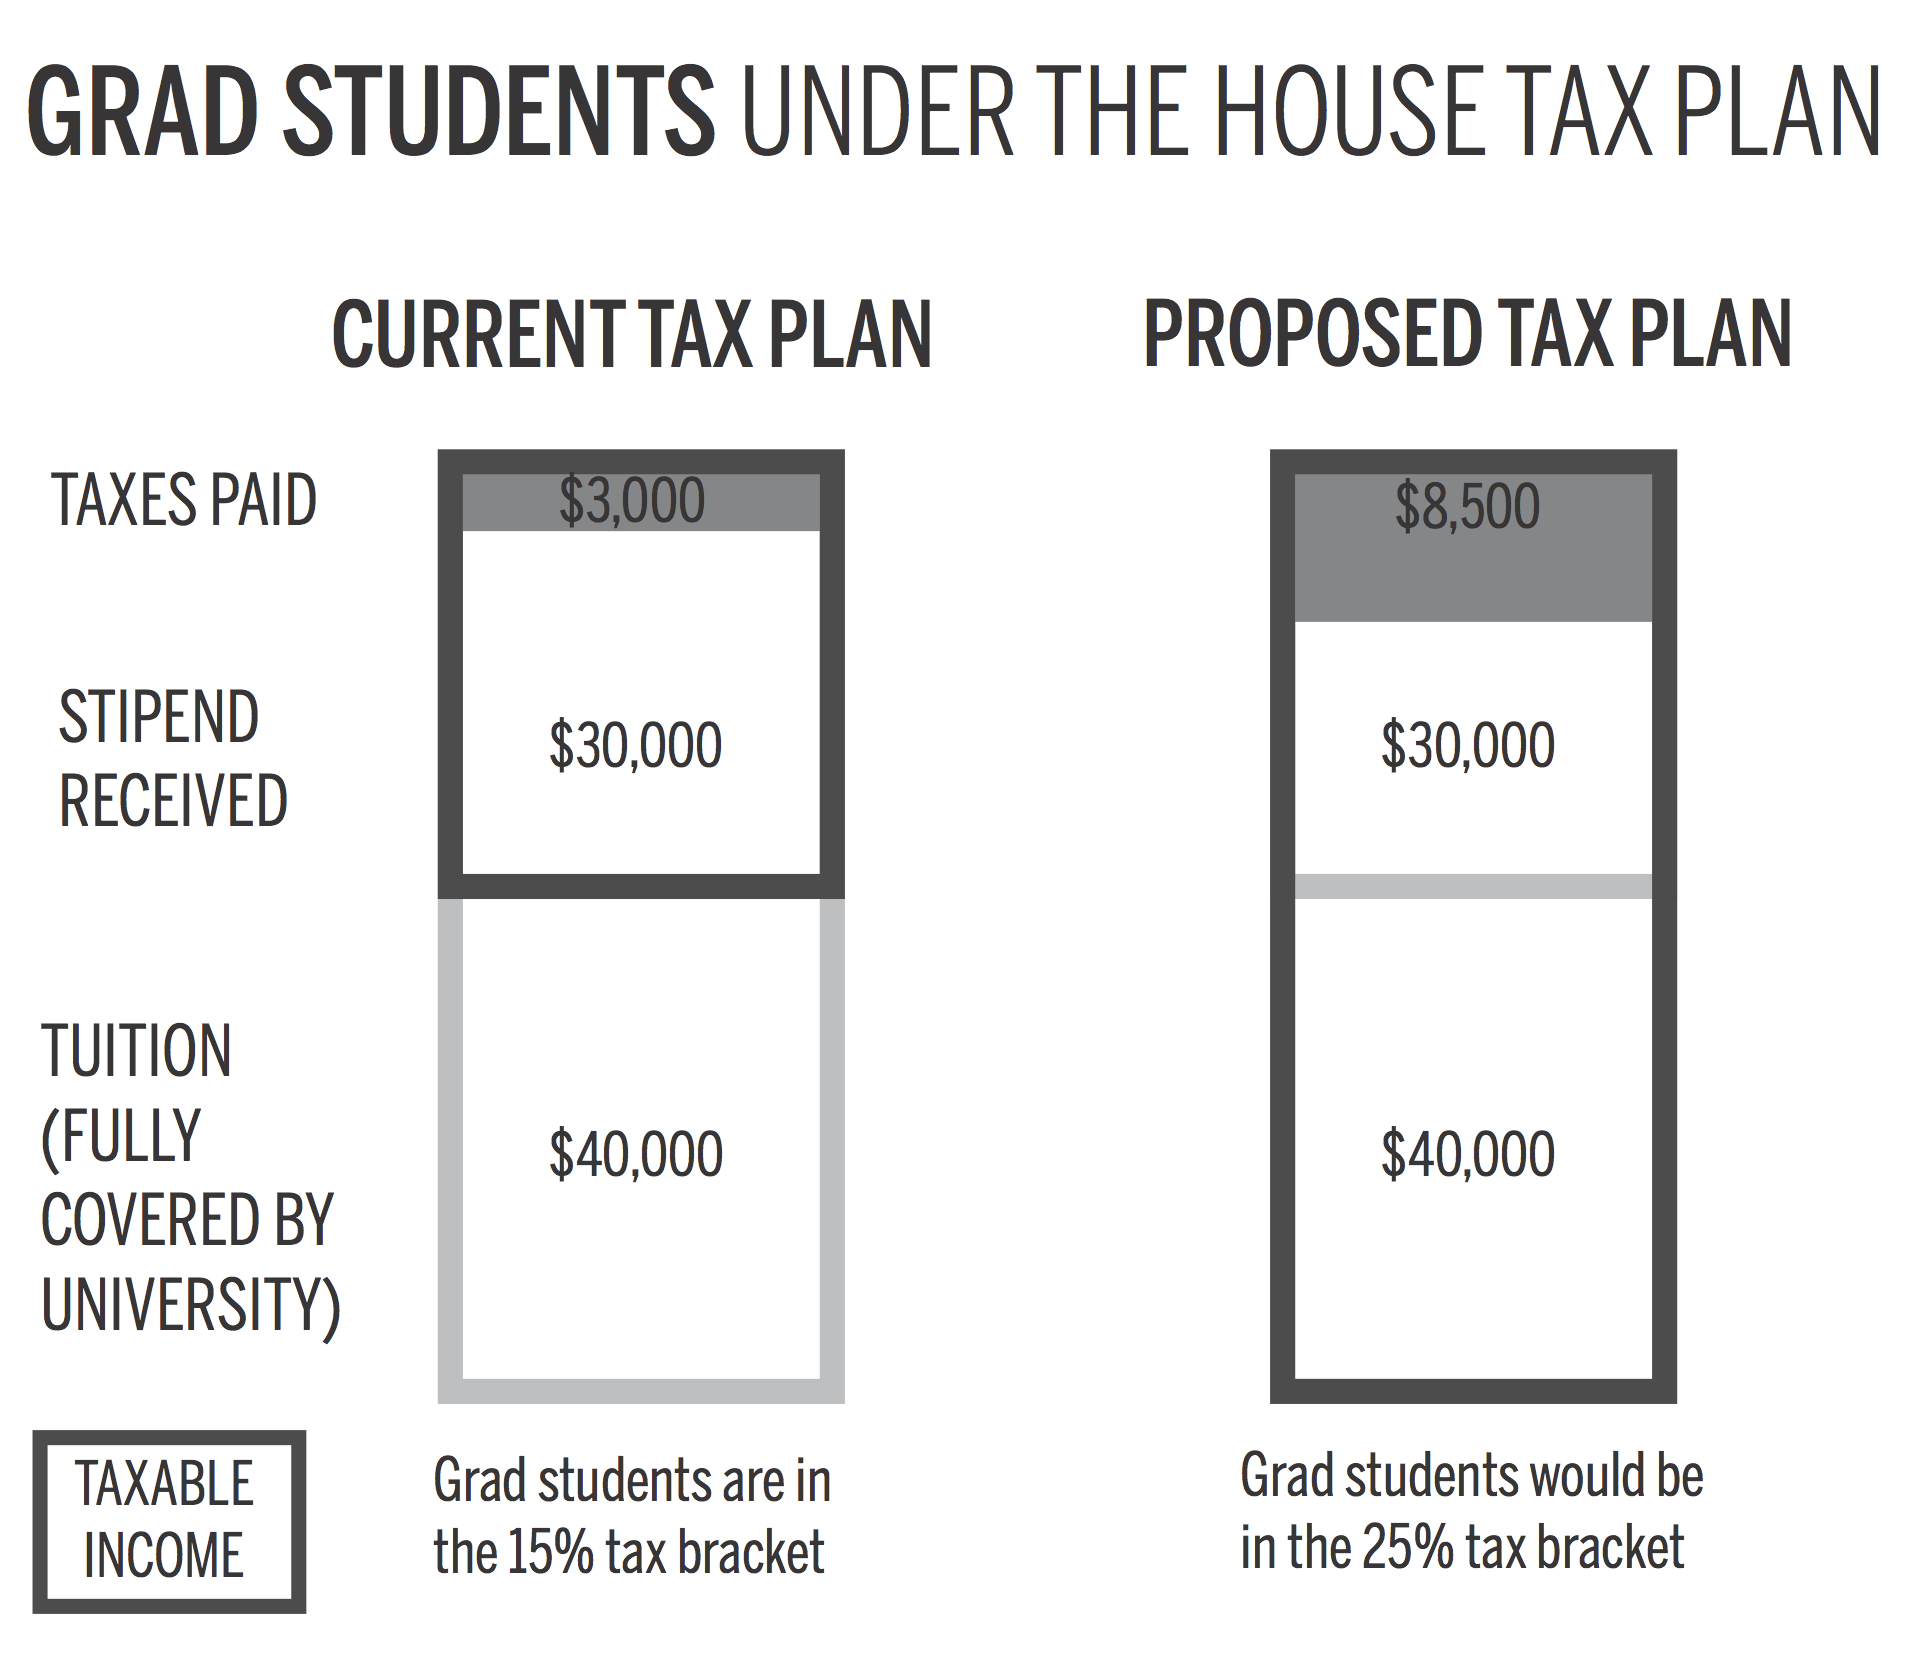 House plan could triple grad student taxes